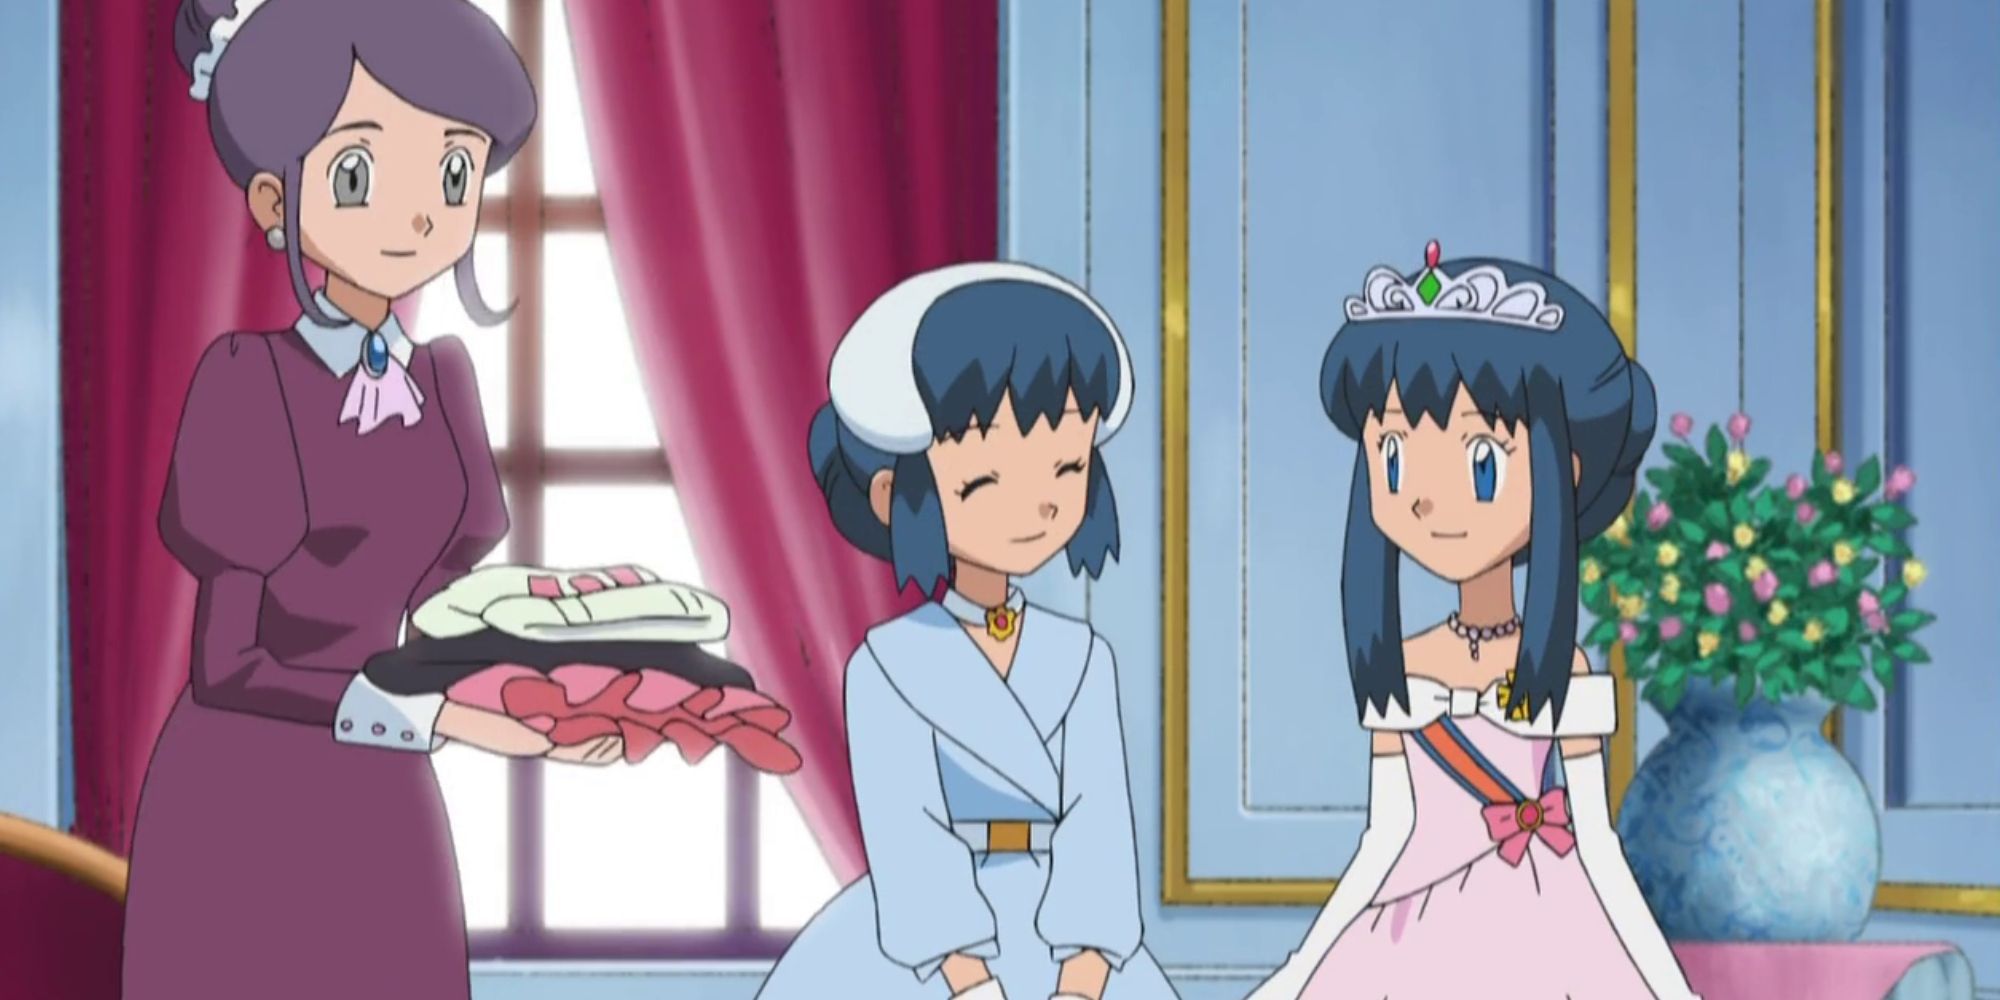 Princess Salvia and Dawn standing next to each other as they talk about how eerily similar they look.